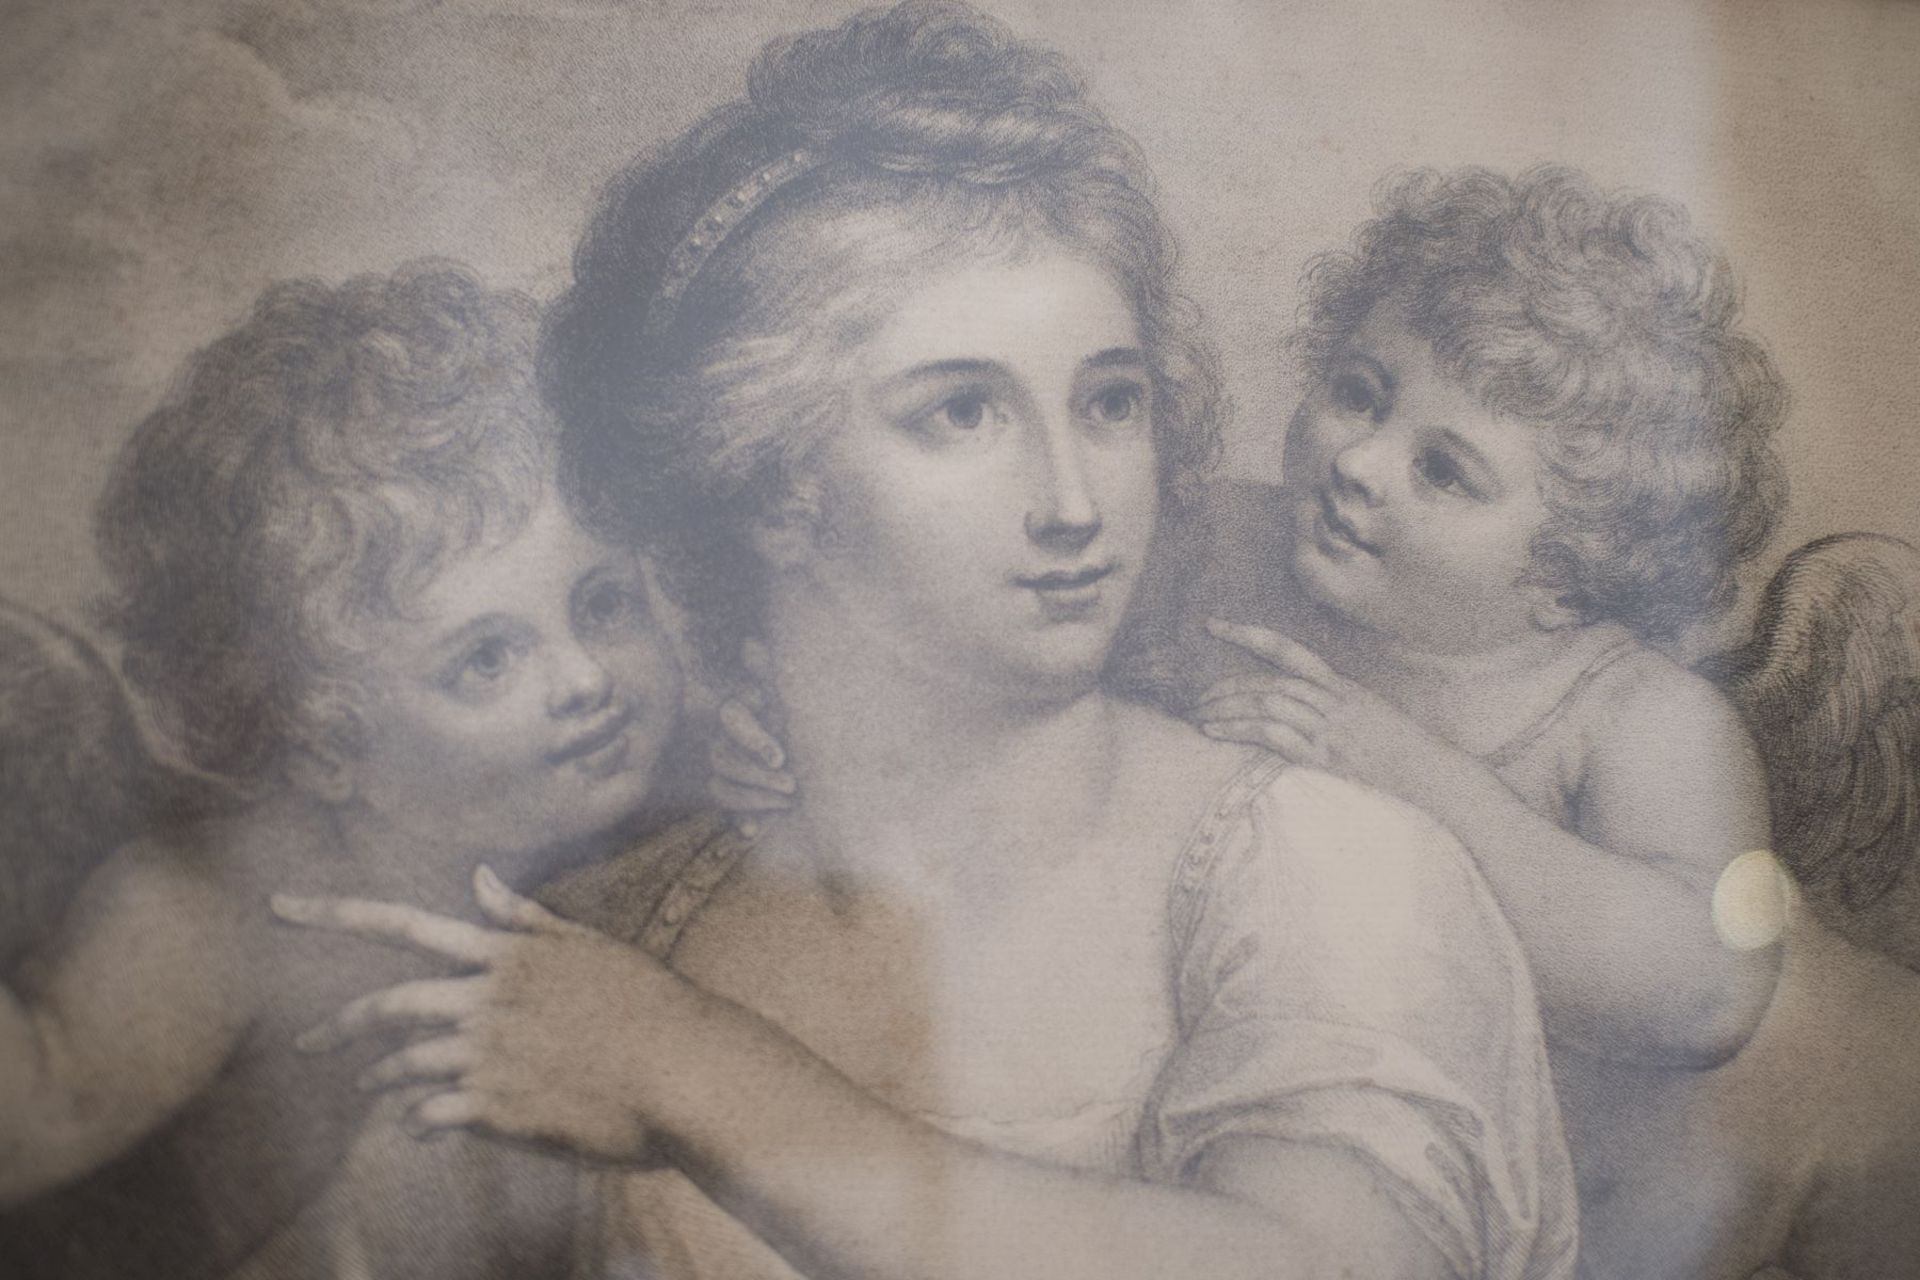 Artist of the 18th century "Lady with two lovers" - Image 2 of 5